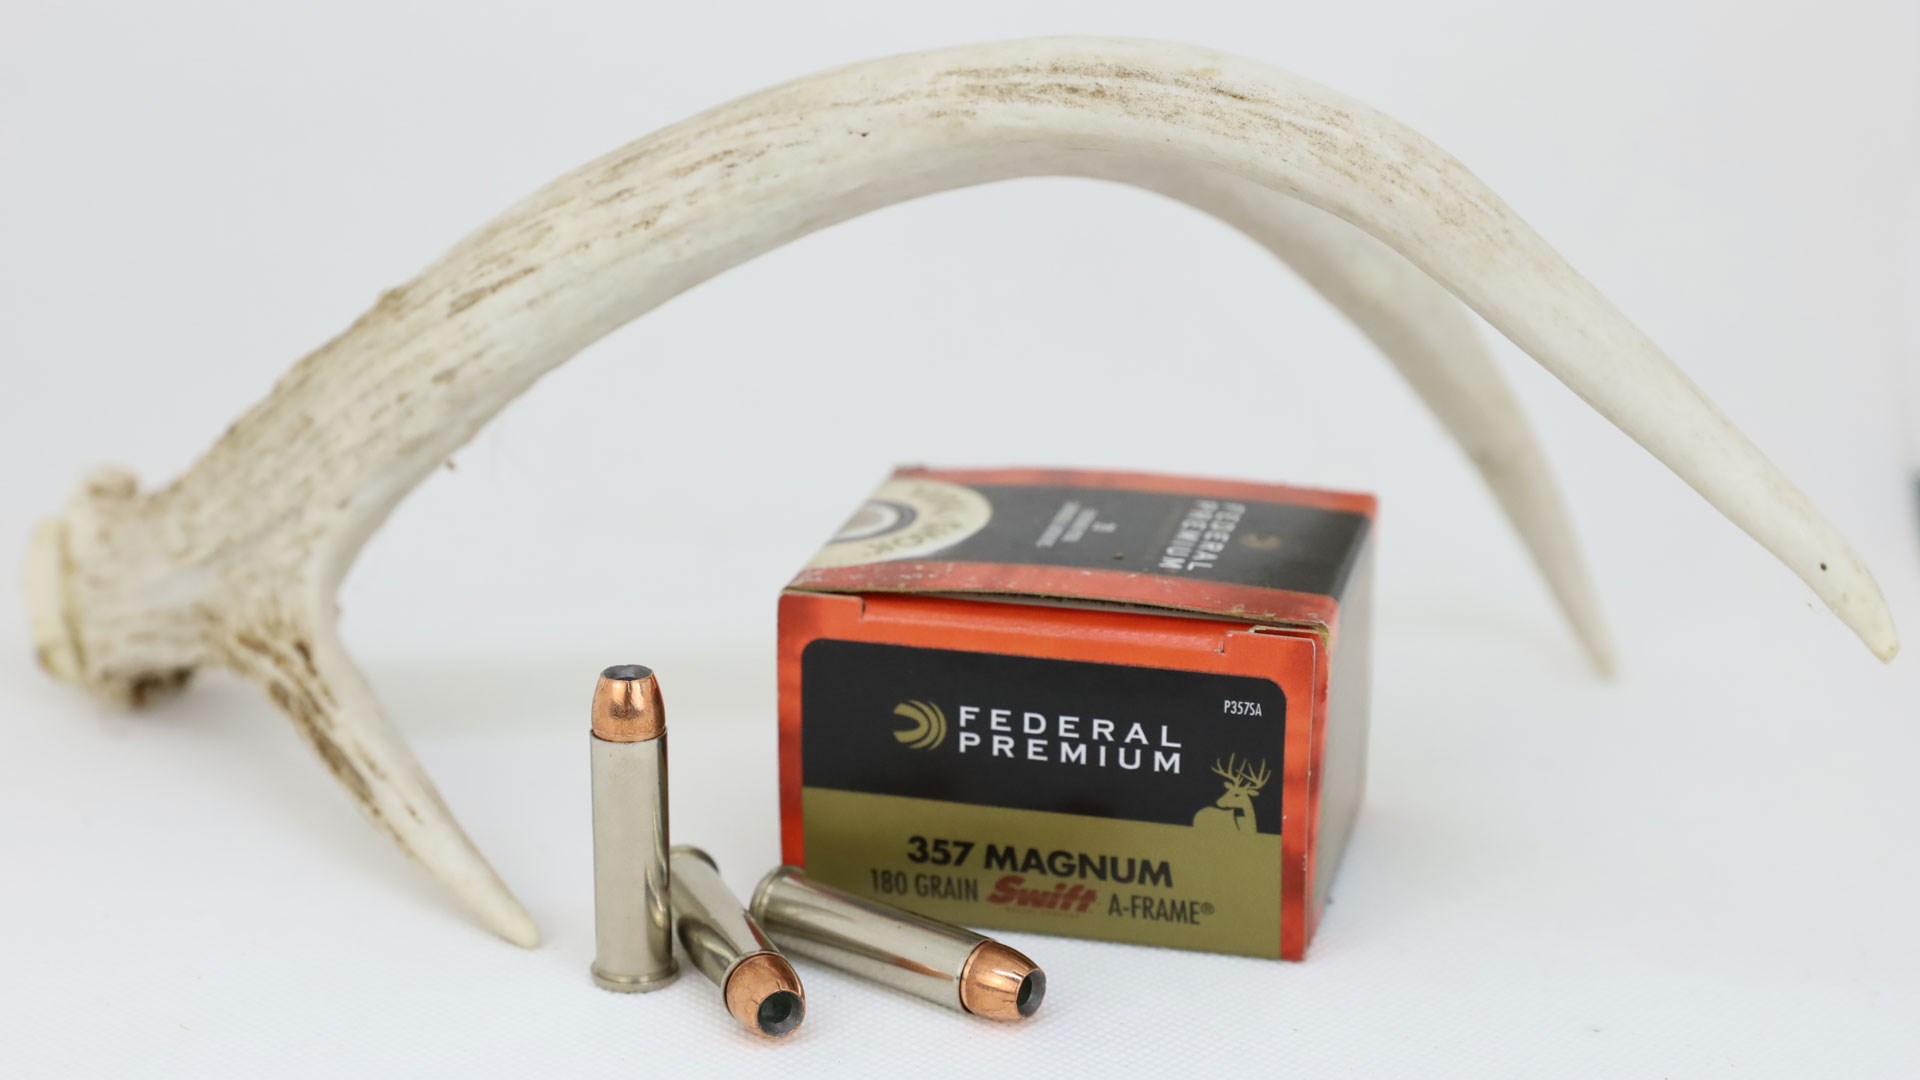 .357 Magnum hollowpoints with antler and box of ammo